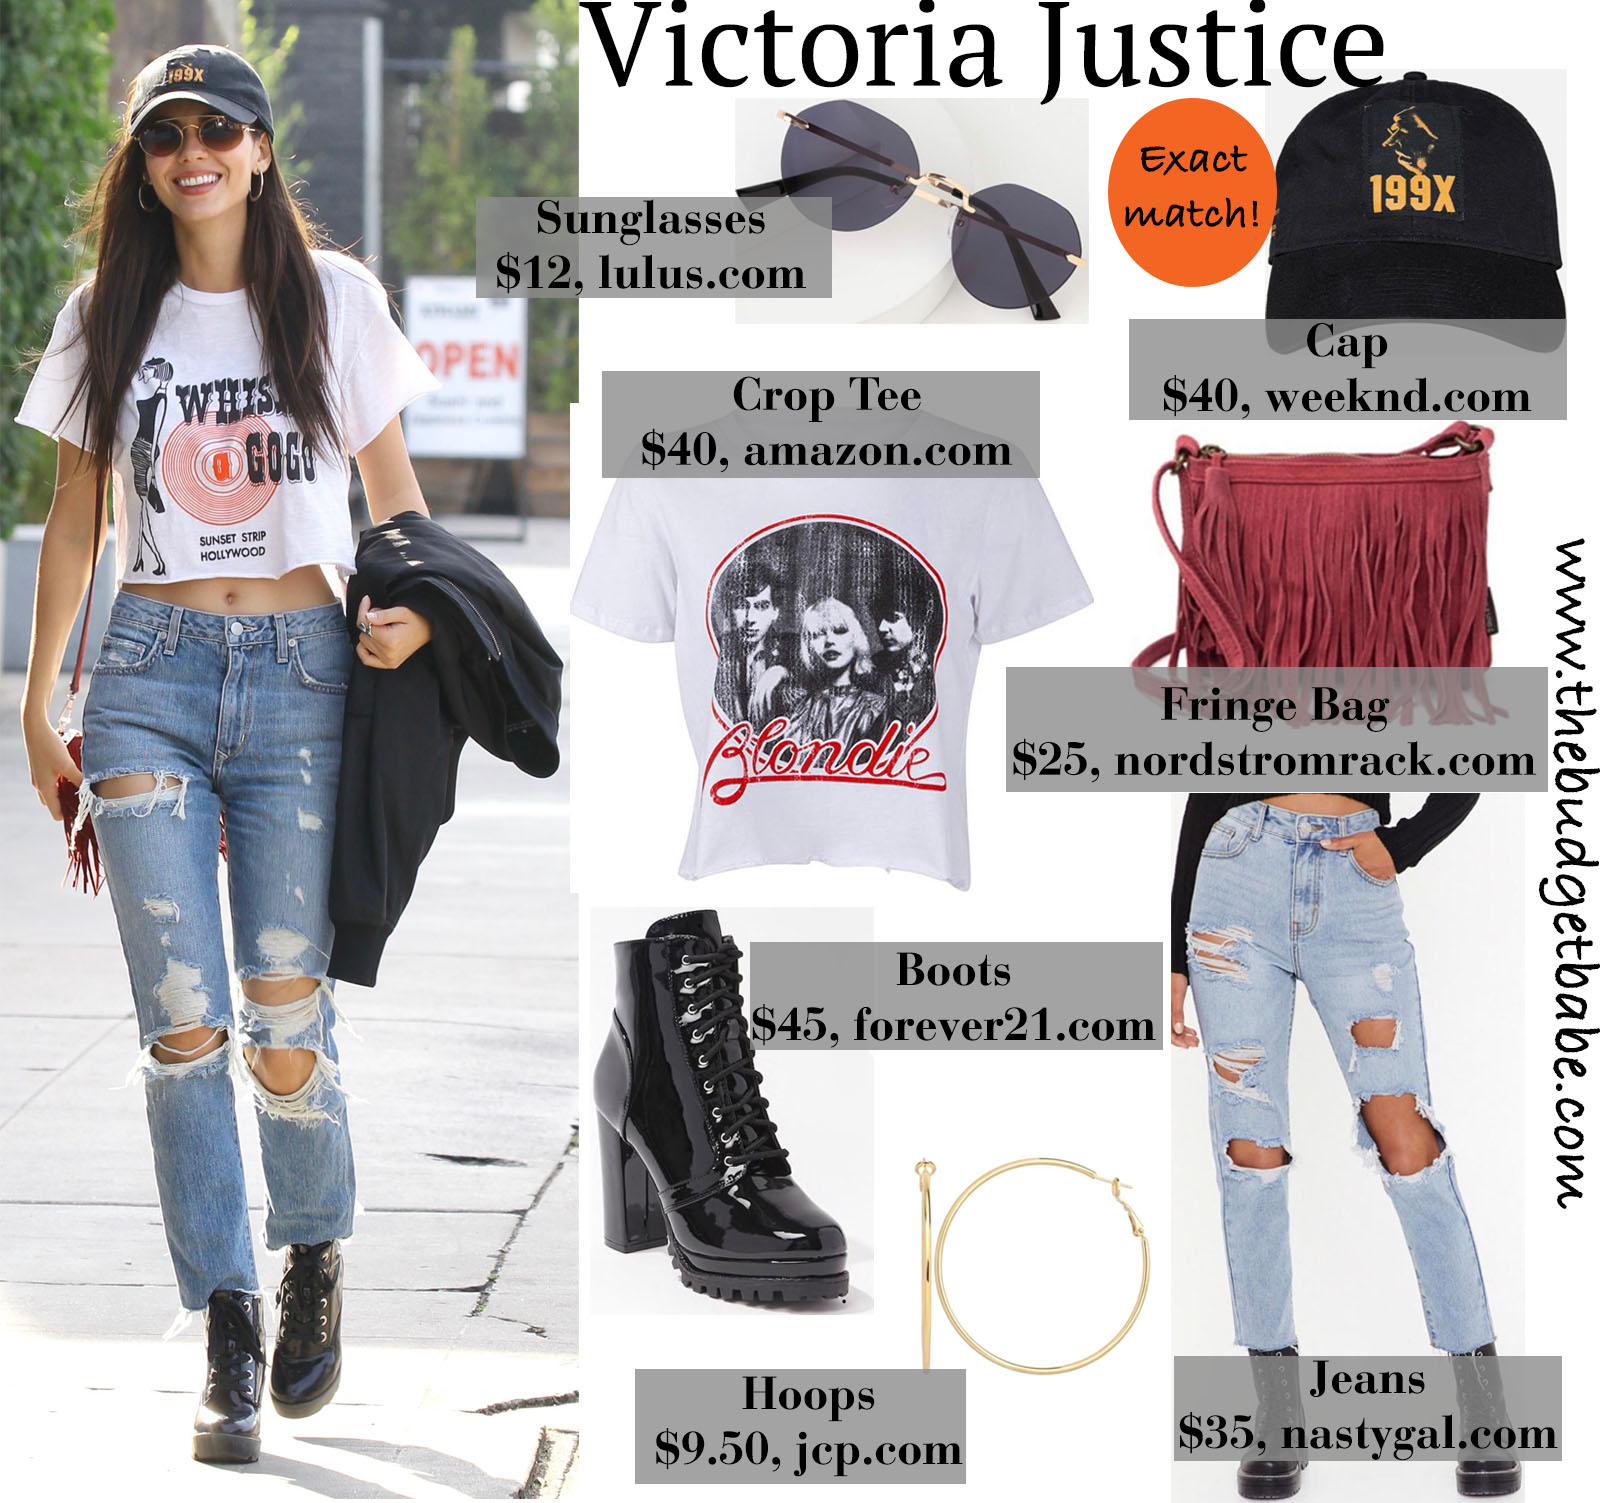 Victoria Justice serves cool street style in classic tee, destroyed jeans, and combat boots!